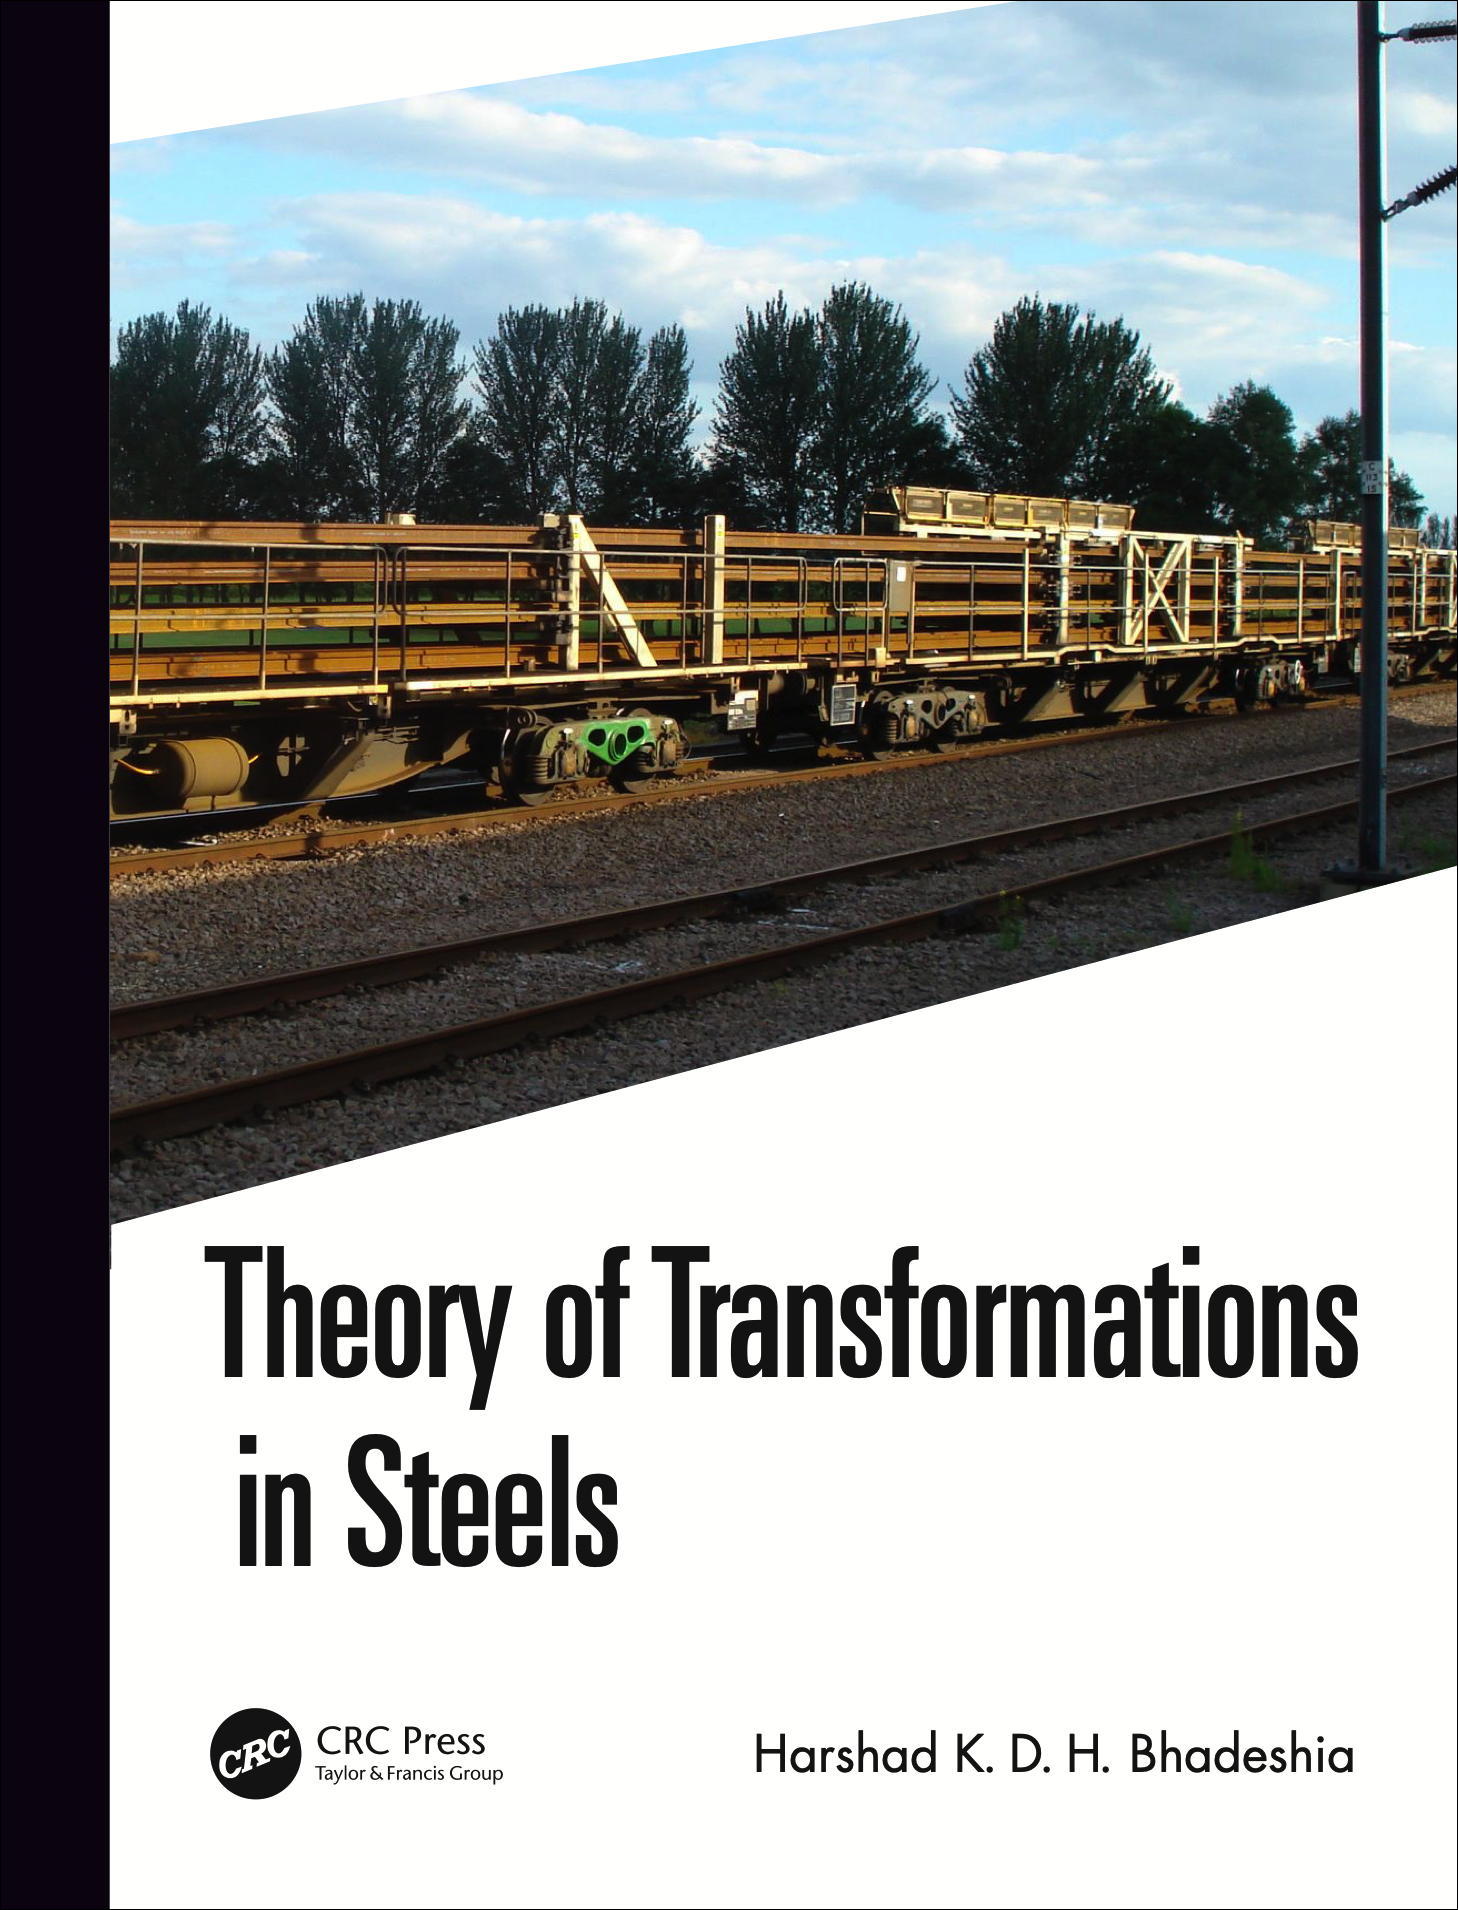 Theory of transformations in steels